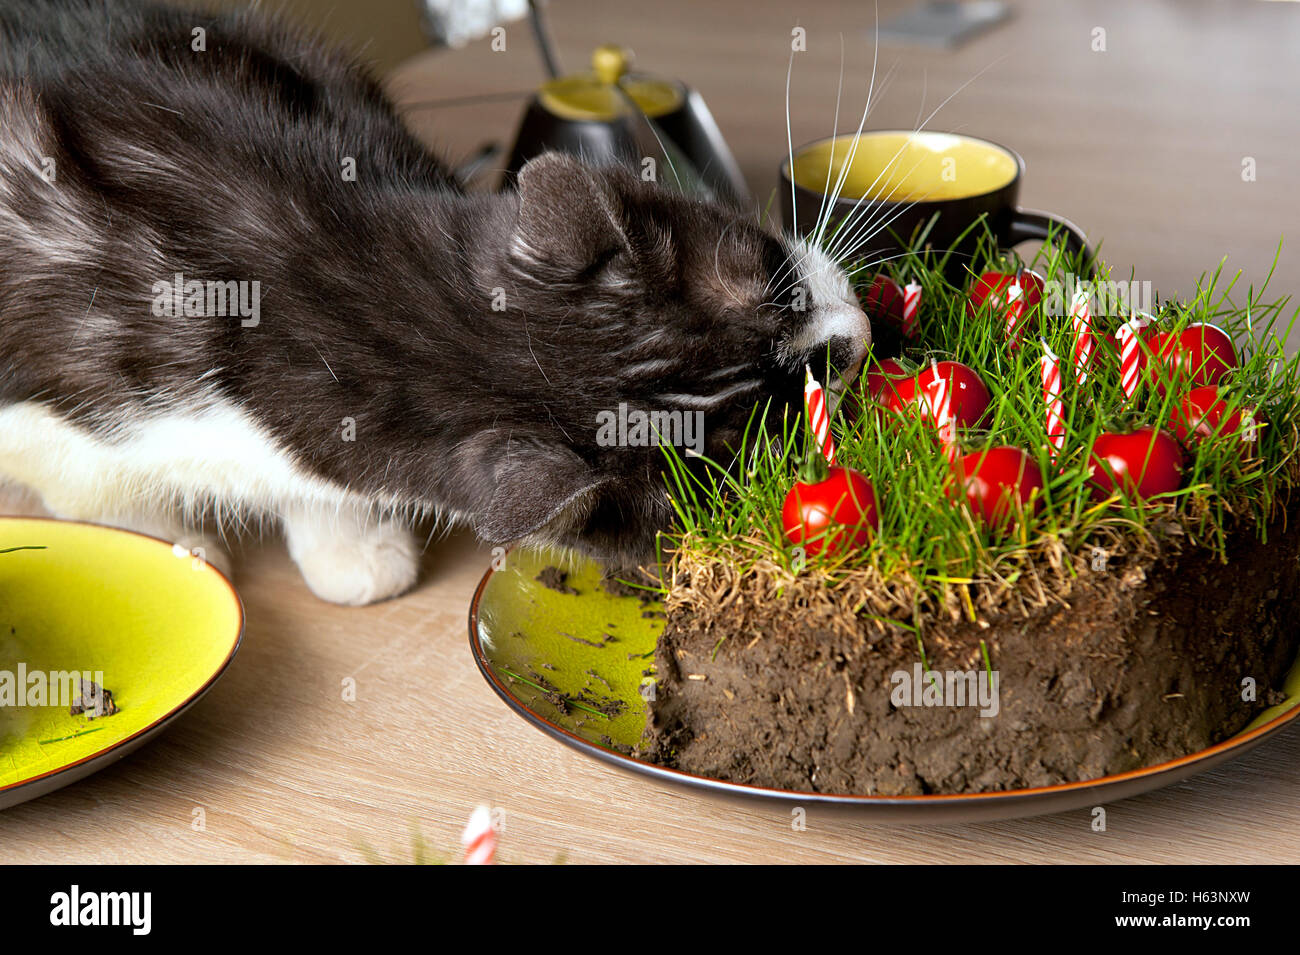 A gray and white cat eating a cake made from ground, grass and cherry tomatoes. Stock Photo